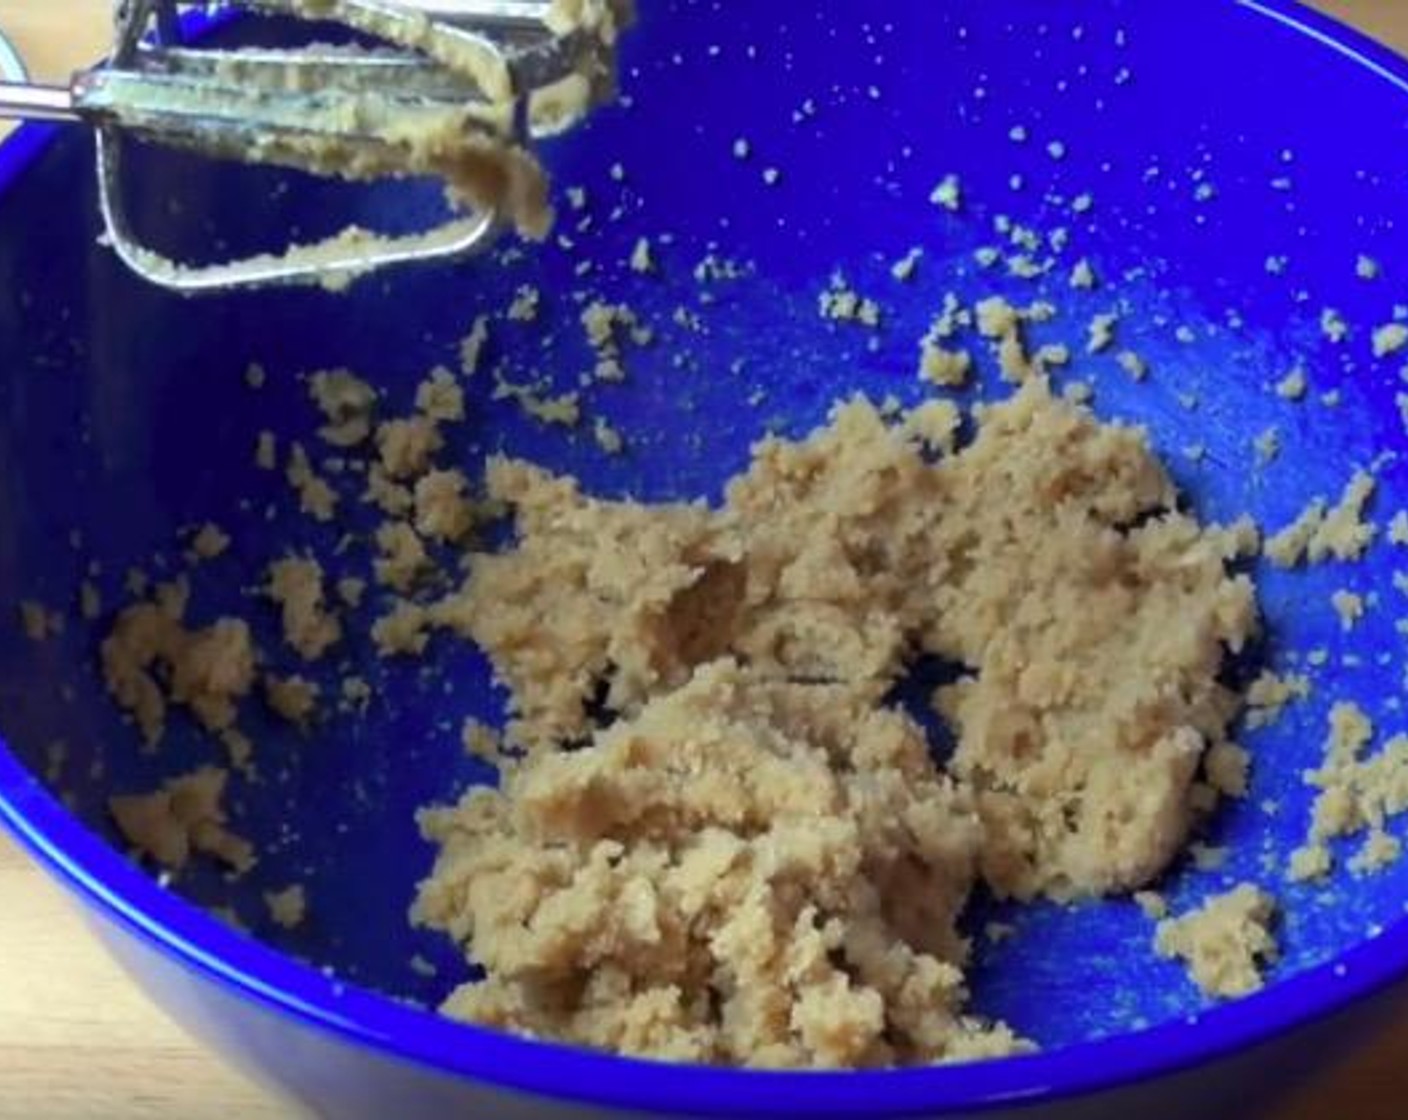 step 1 In a mixing bowl, add Butter (1/3 cup), Caster Sugar (1/2 cup), Brown Sugar (1/2 cup) and Vanilla Extract (1 tsp). Beat with an electric mixer until fluffy.